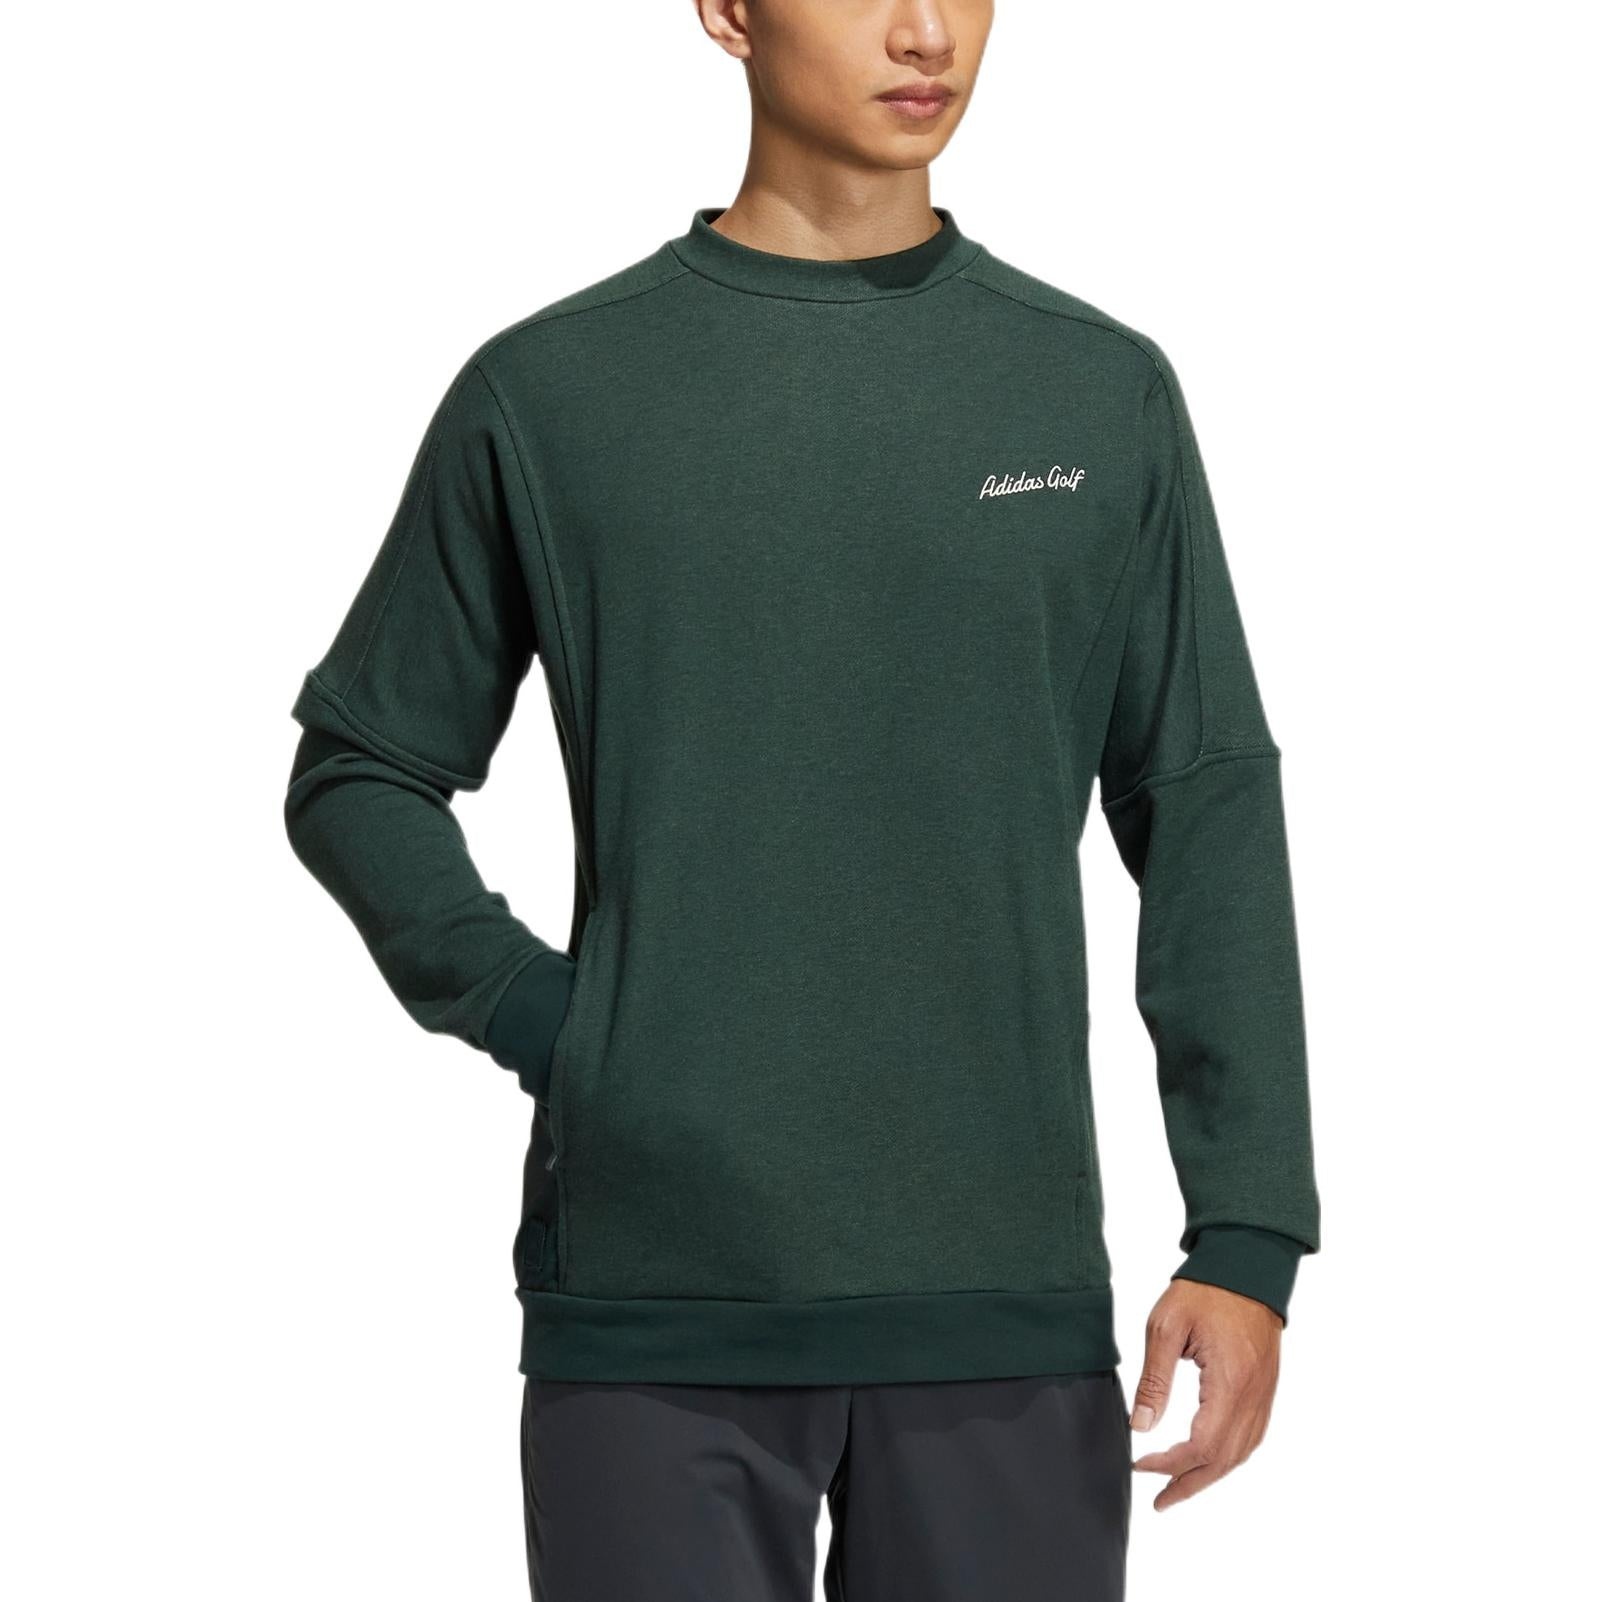 Men's adidas Gt Crew Sw Solid Color Alphabet Embroidered Round Neck Pullover Long Sleeves Green HG32 - 2